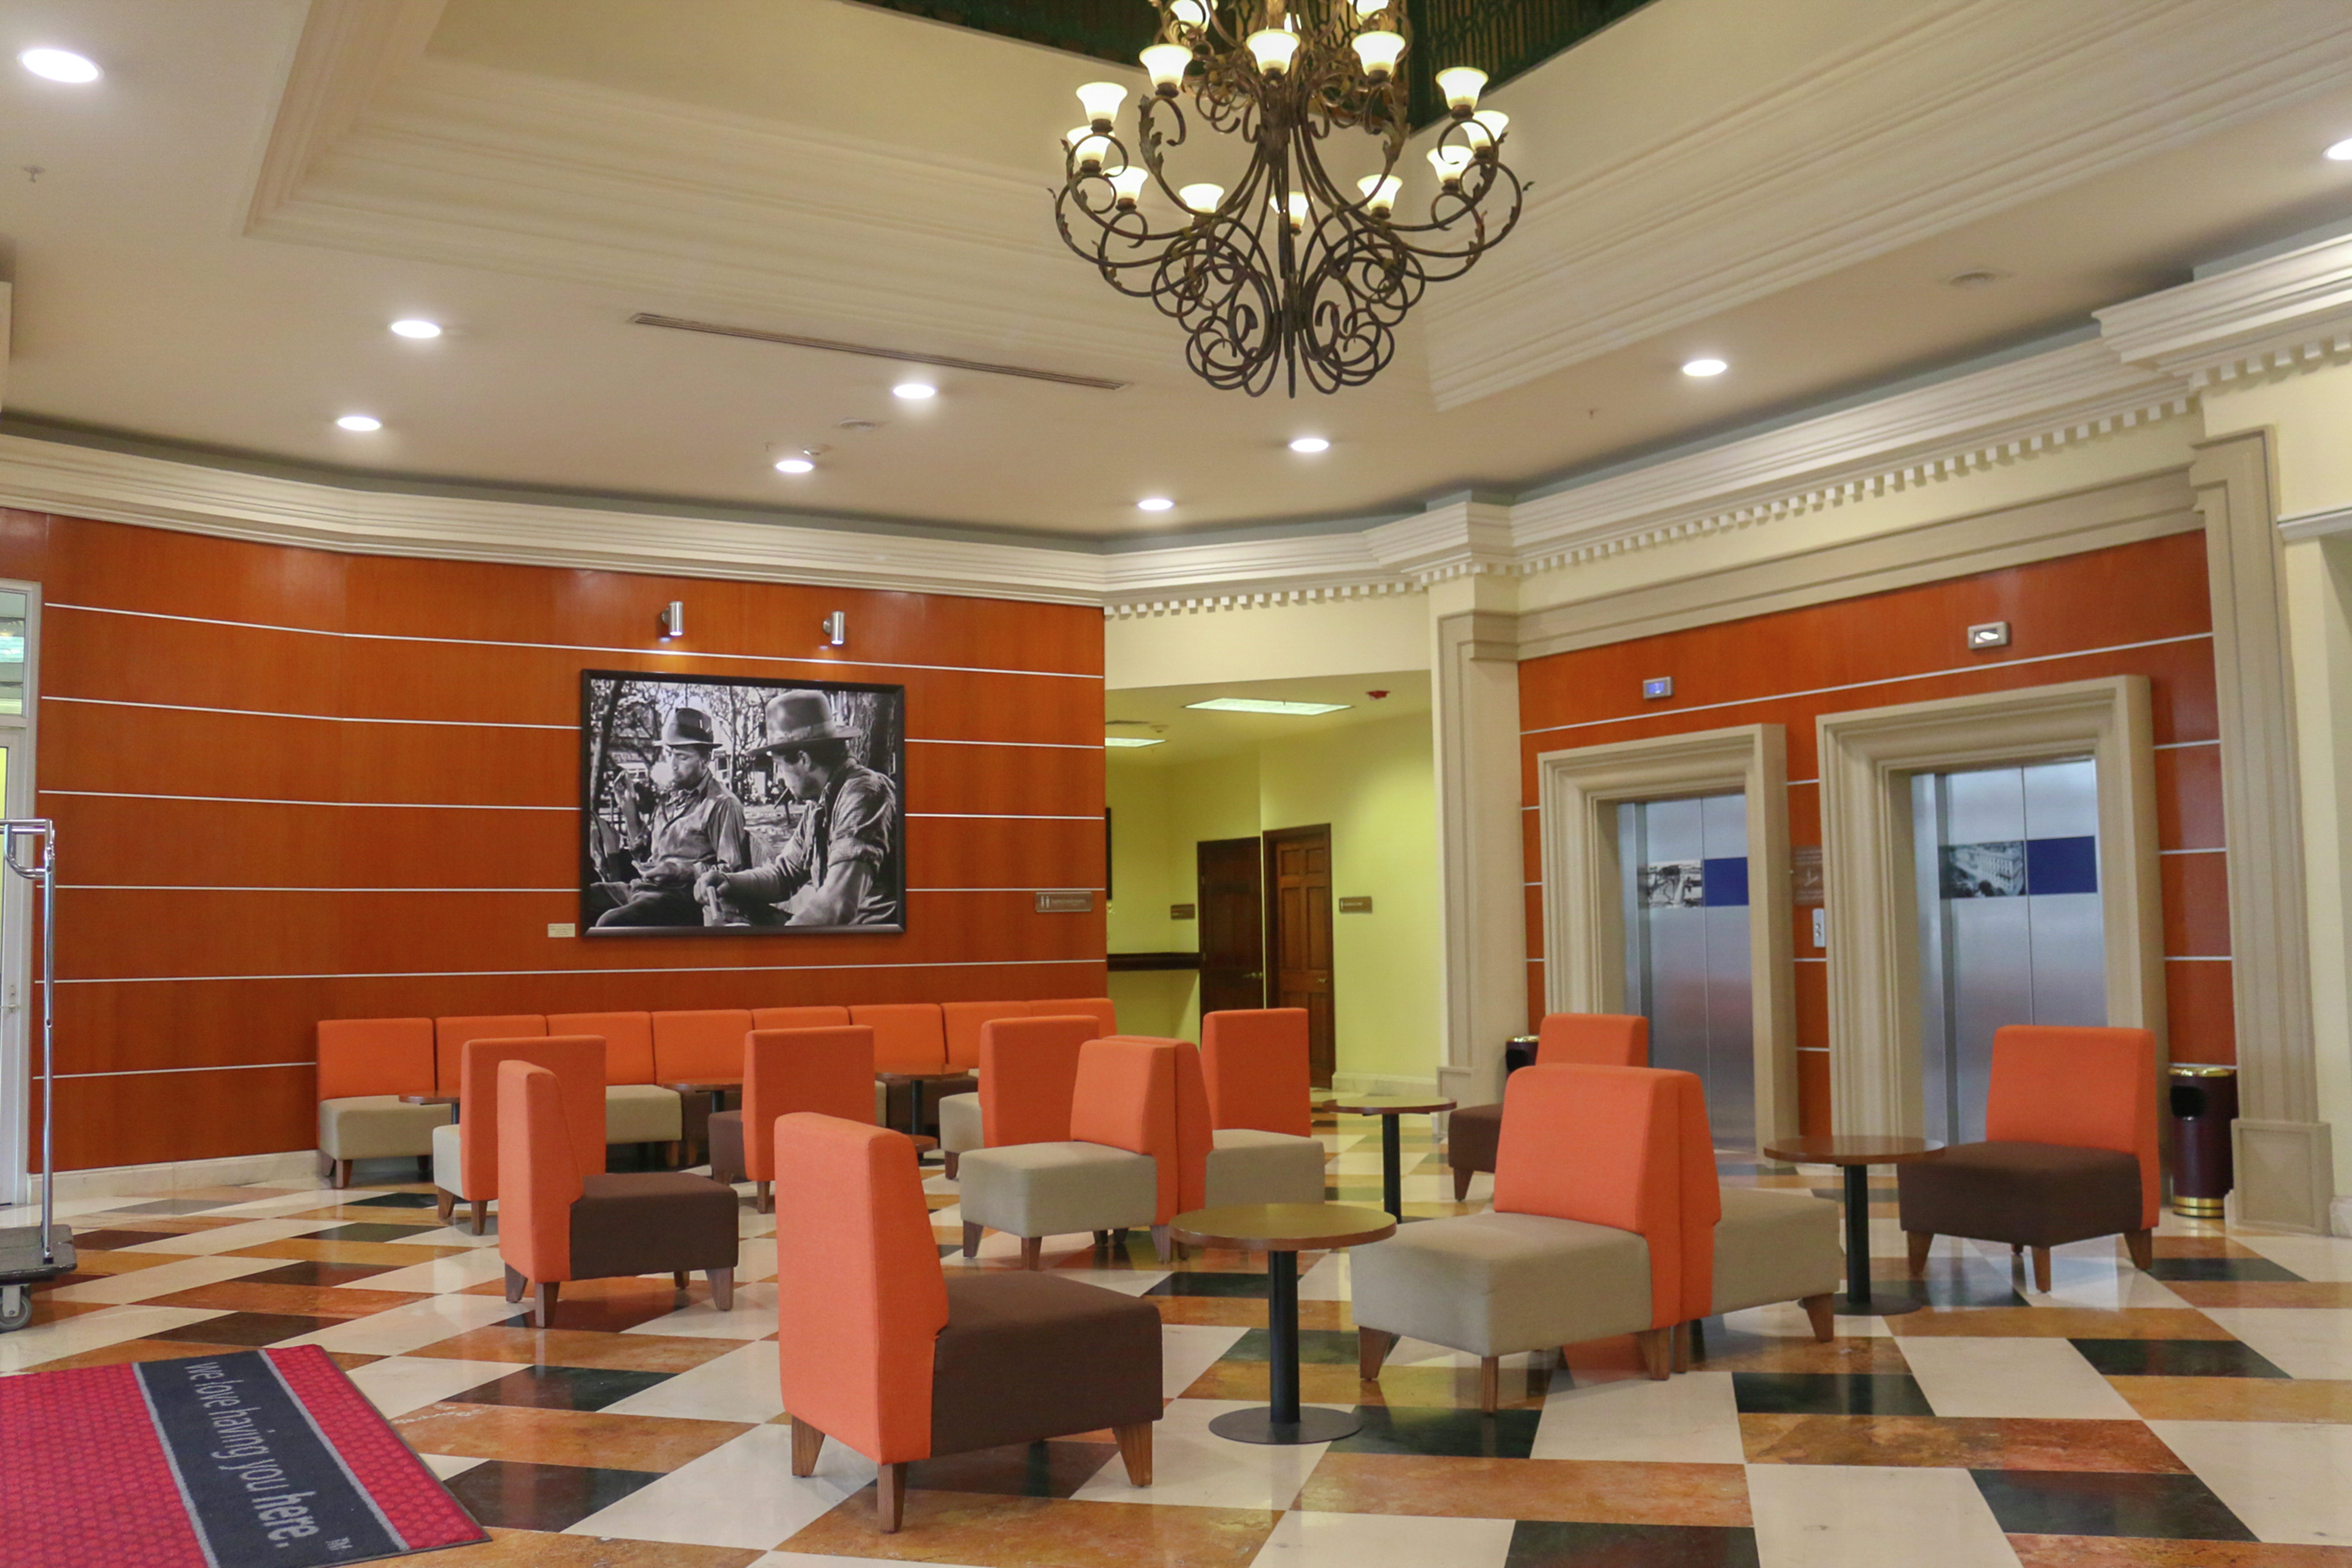 Lobby Seating Area with Soft Chairs, Tables and Wall Mounted HDTV